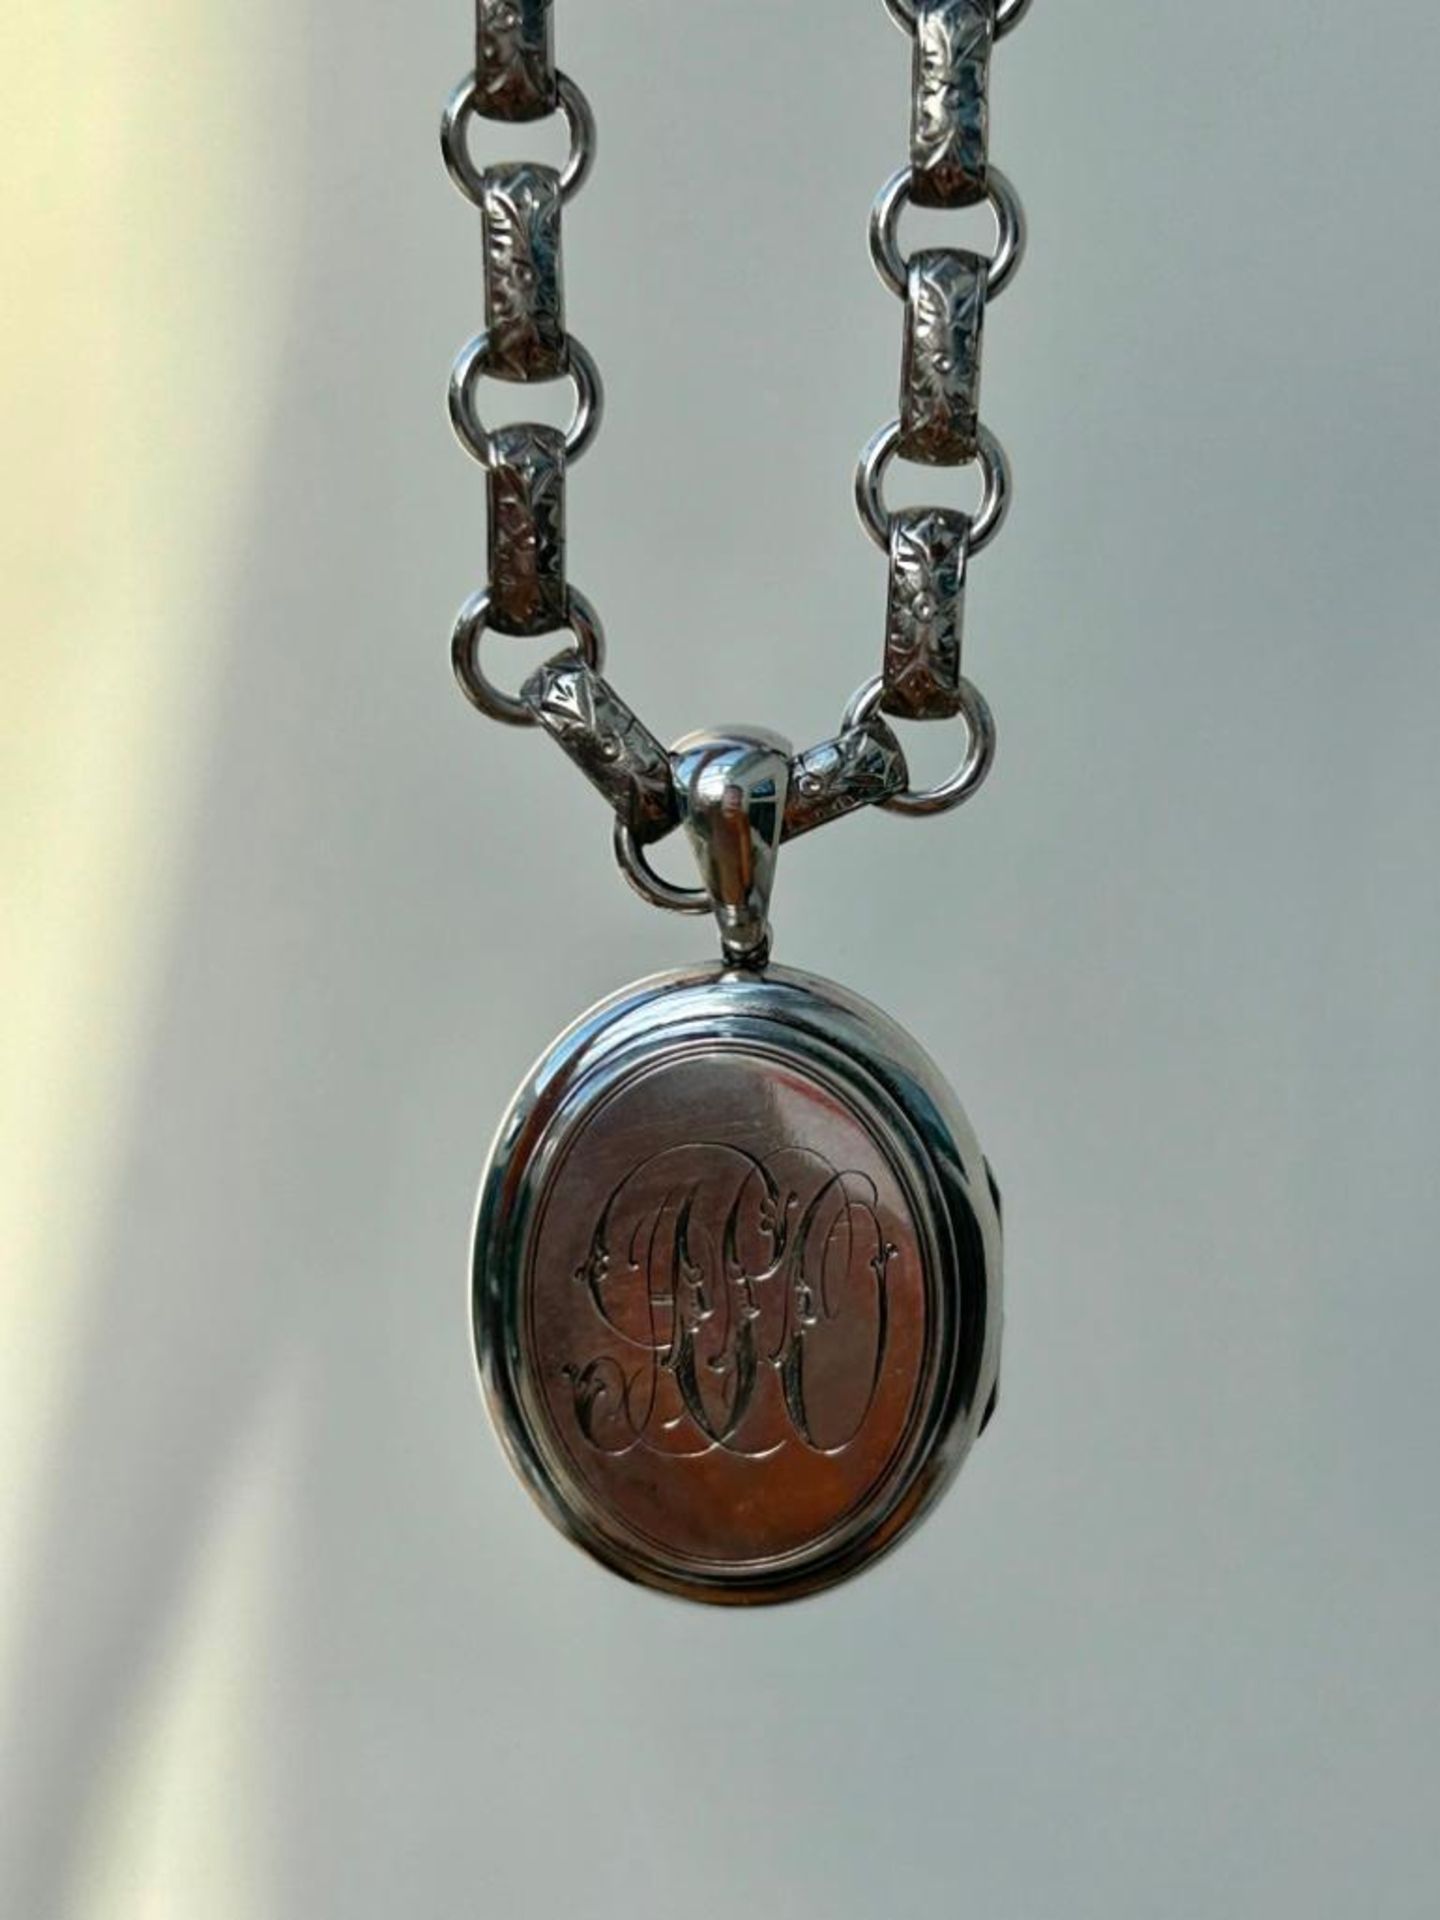 Antique Bookchain and Locket Pendant in Silver